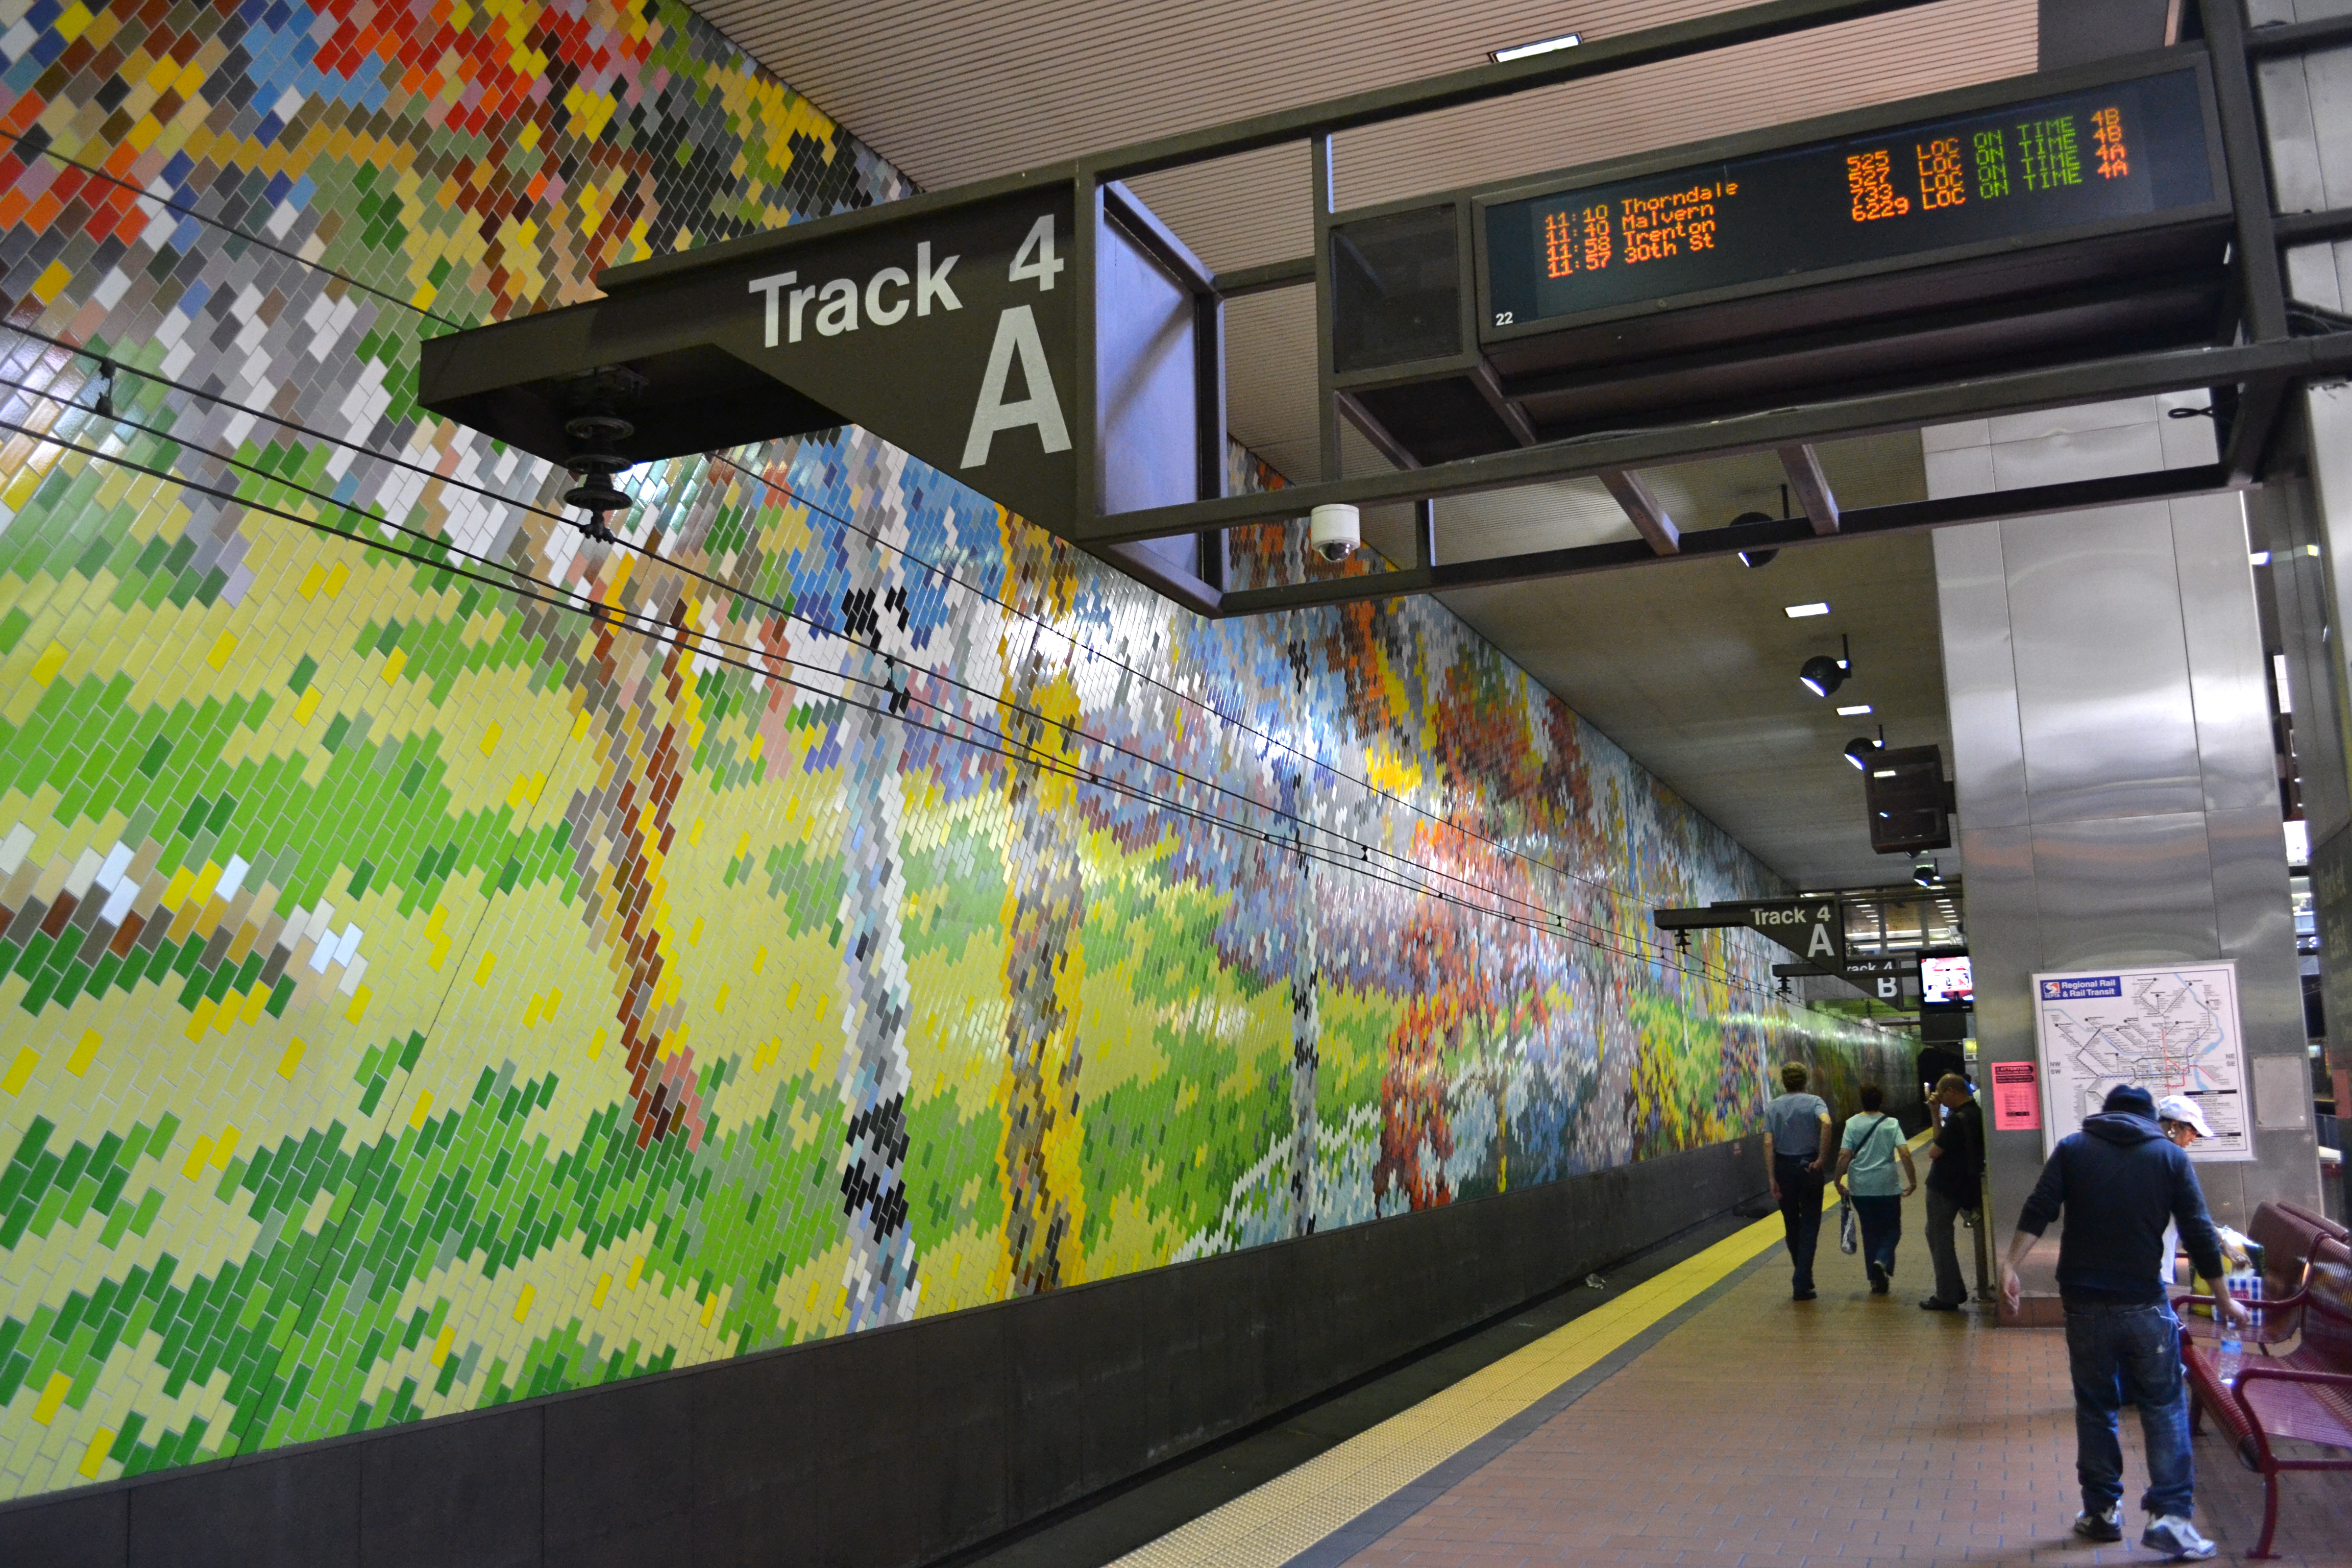 The turnstiles will incorporate each of the station's unique design features, like the colored bricks at Market East Station